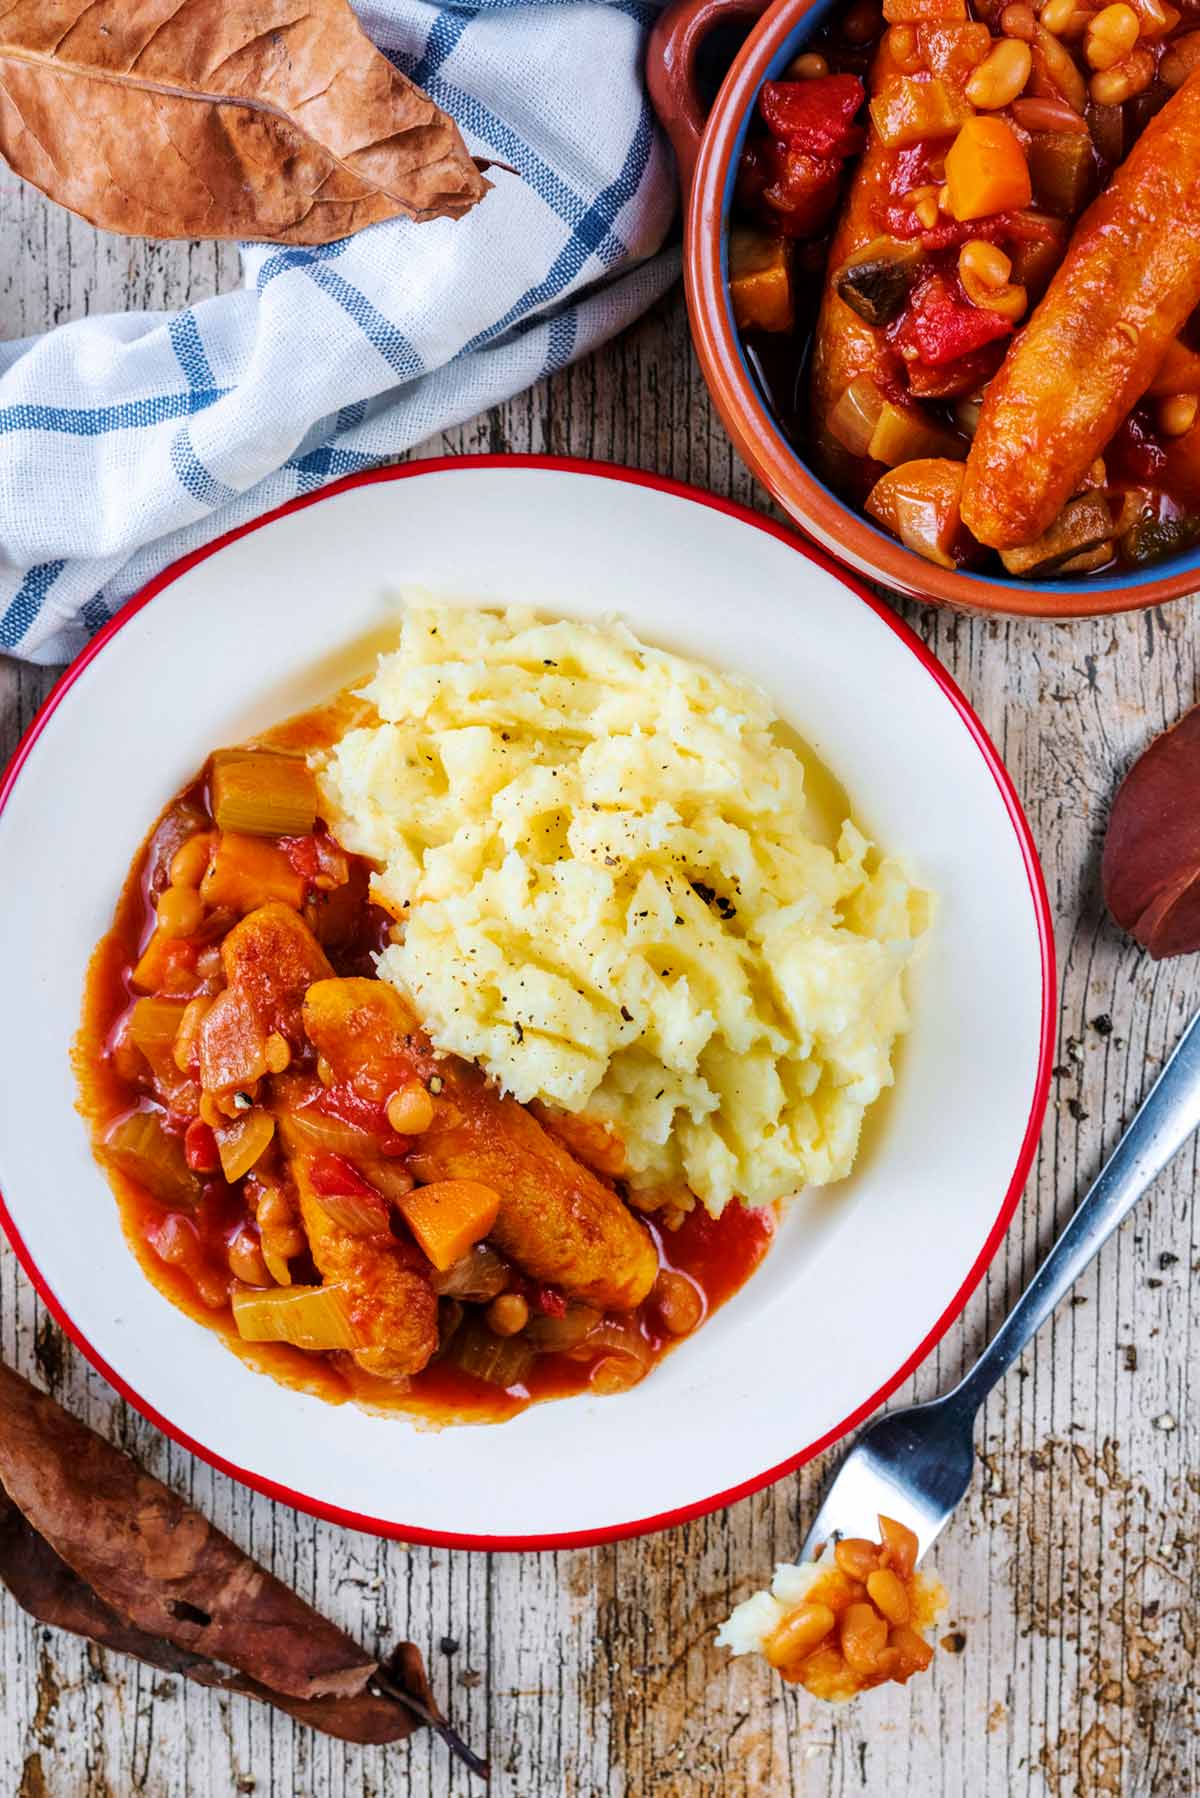 Sausage casserole and mashed potato on a plate next to a large bowl of extra casserole.